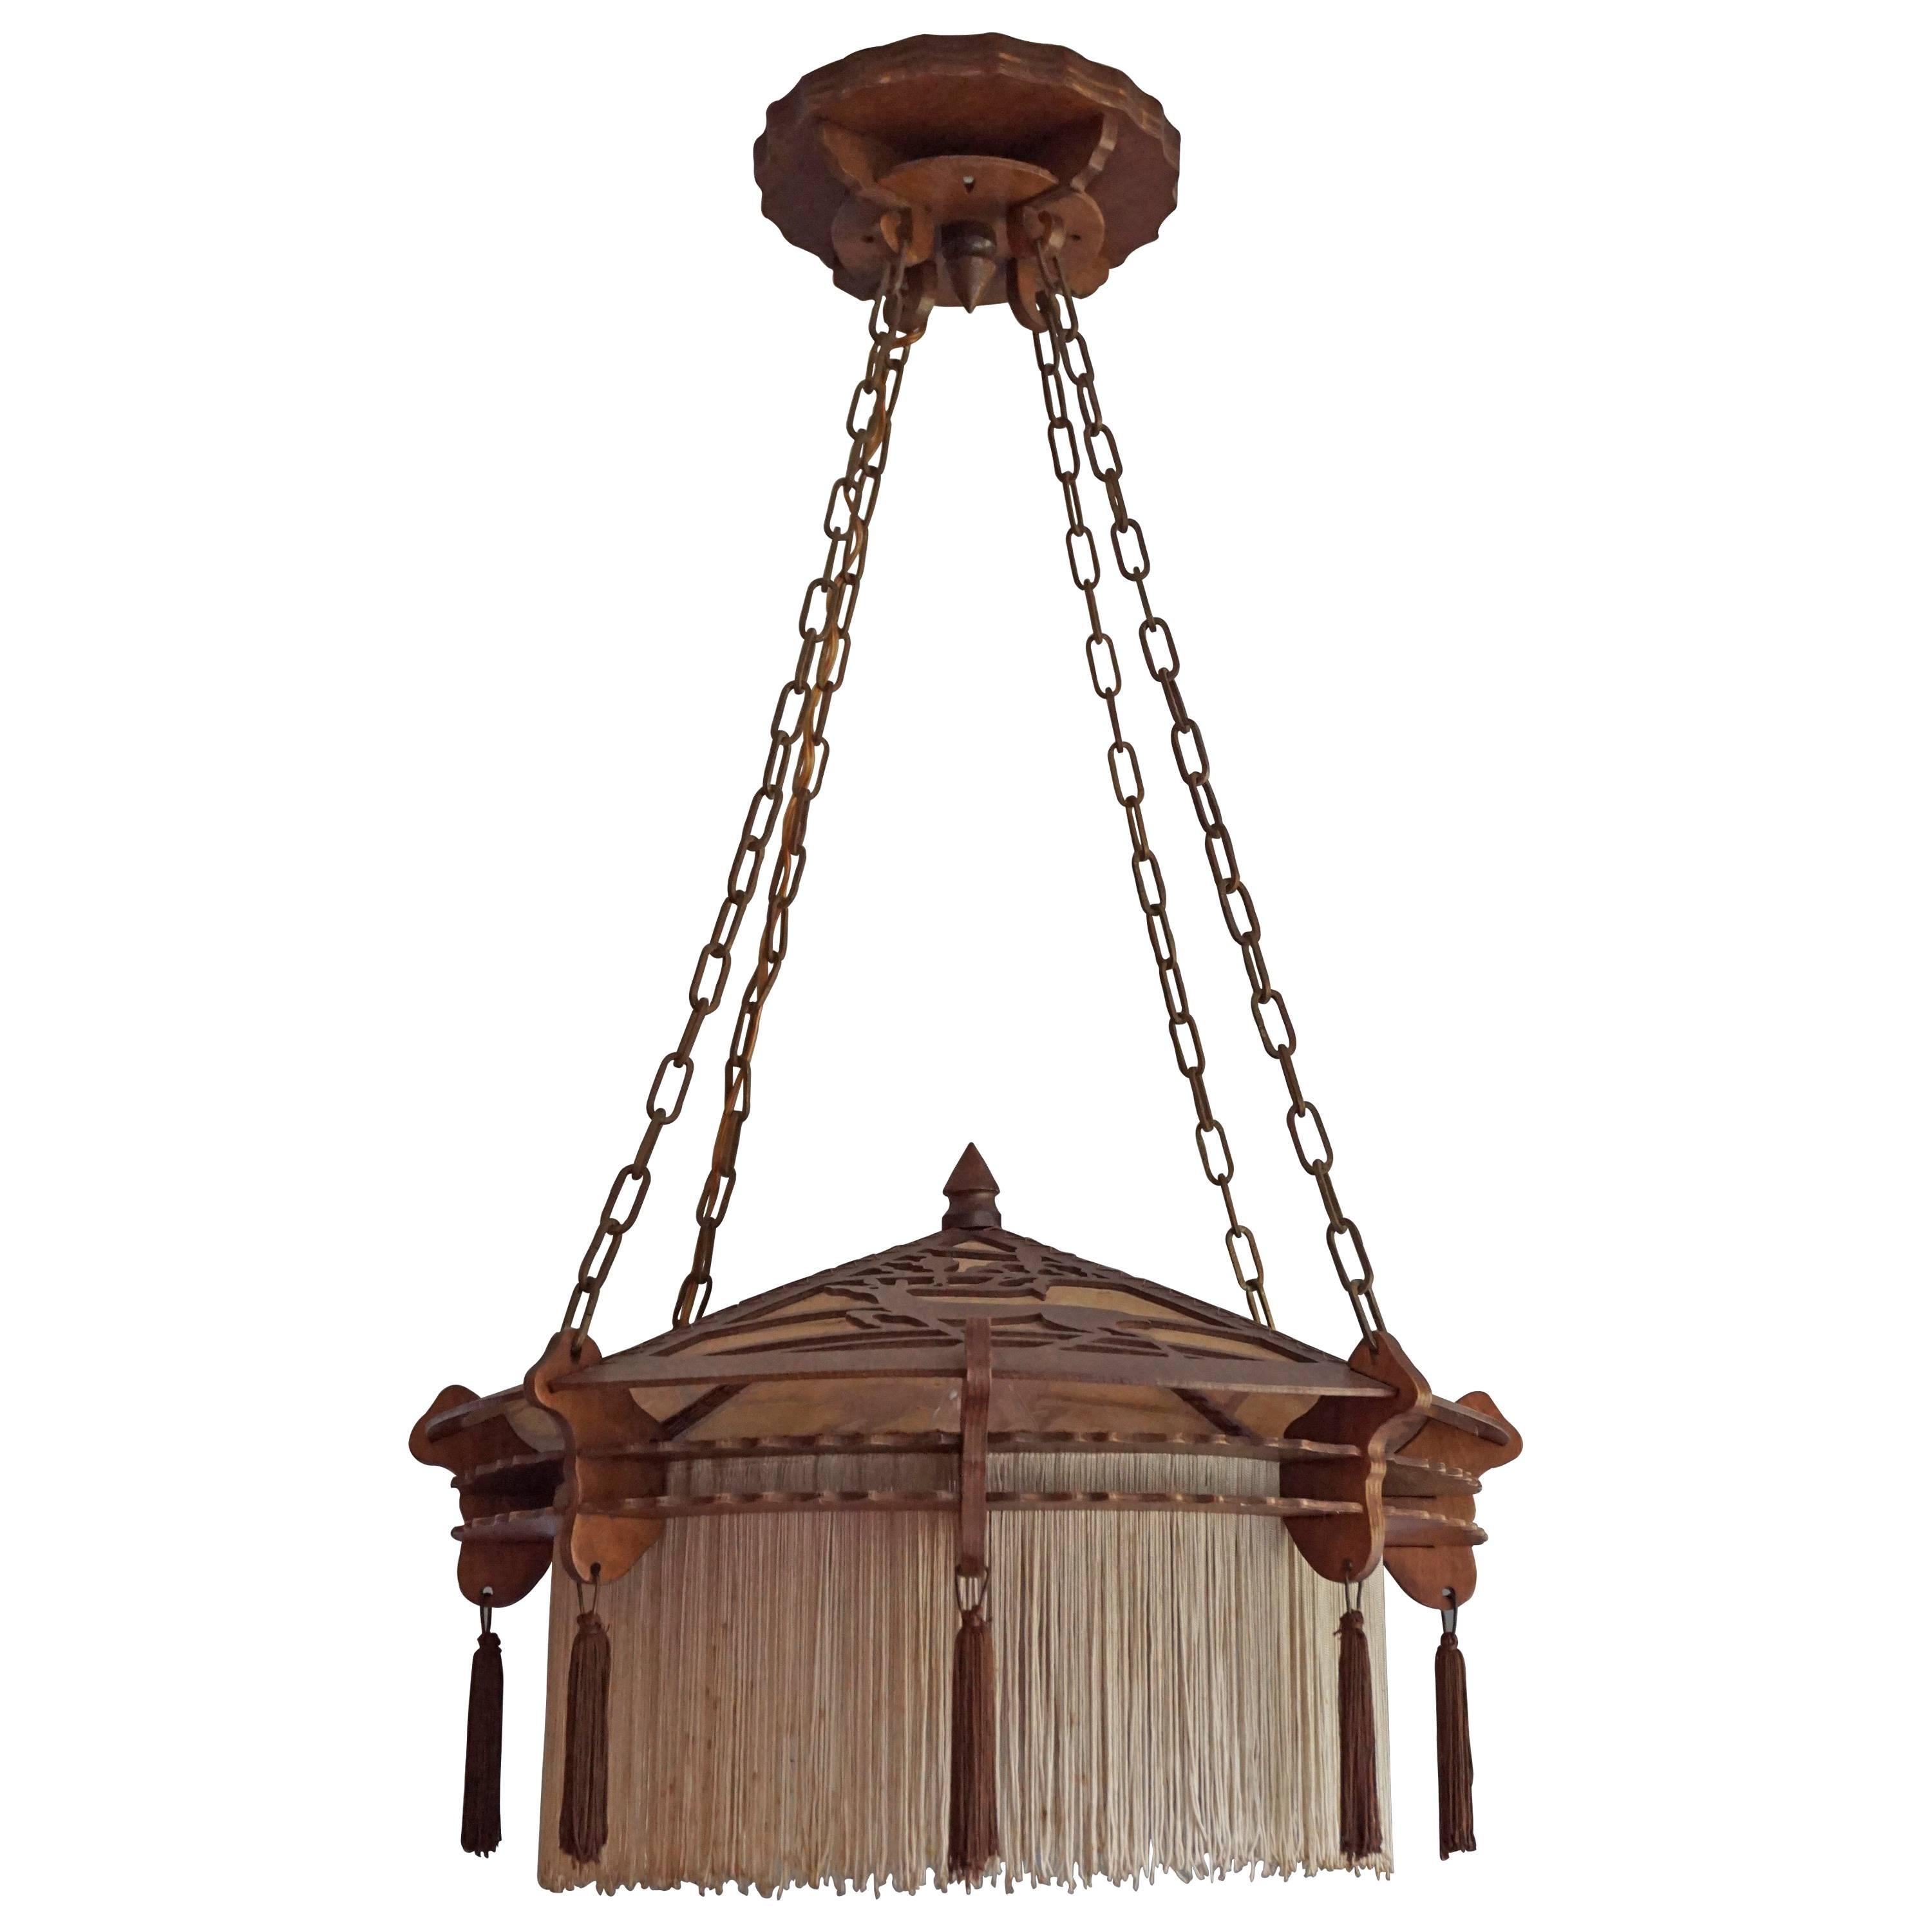 Early 20th Century Arts & Crafts Handsawn Wooden Pendant with Tassels & Fringes